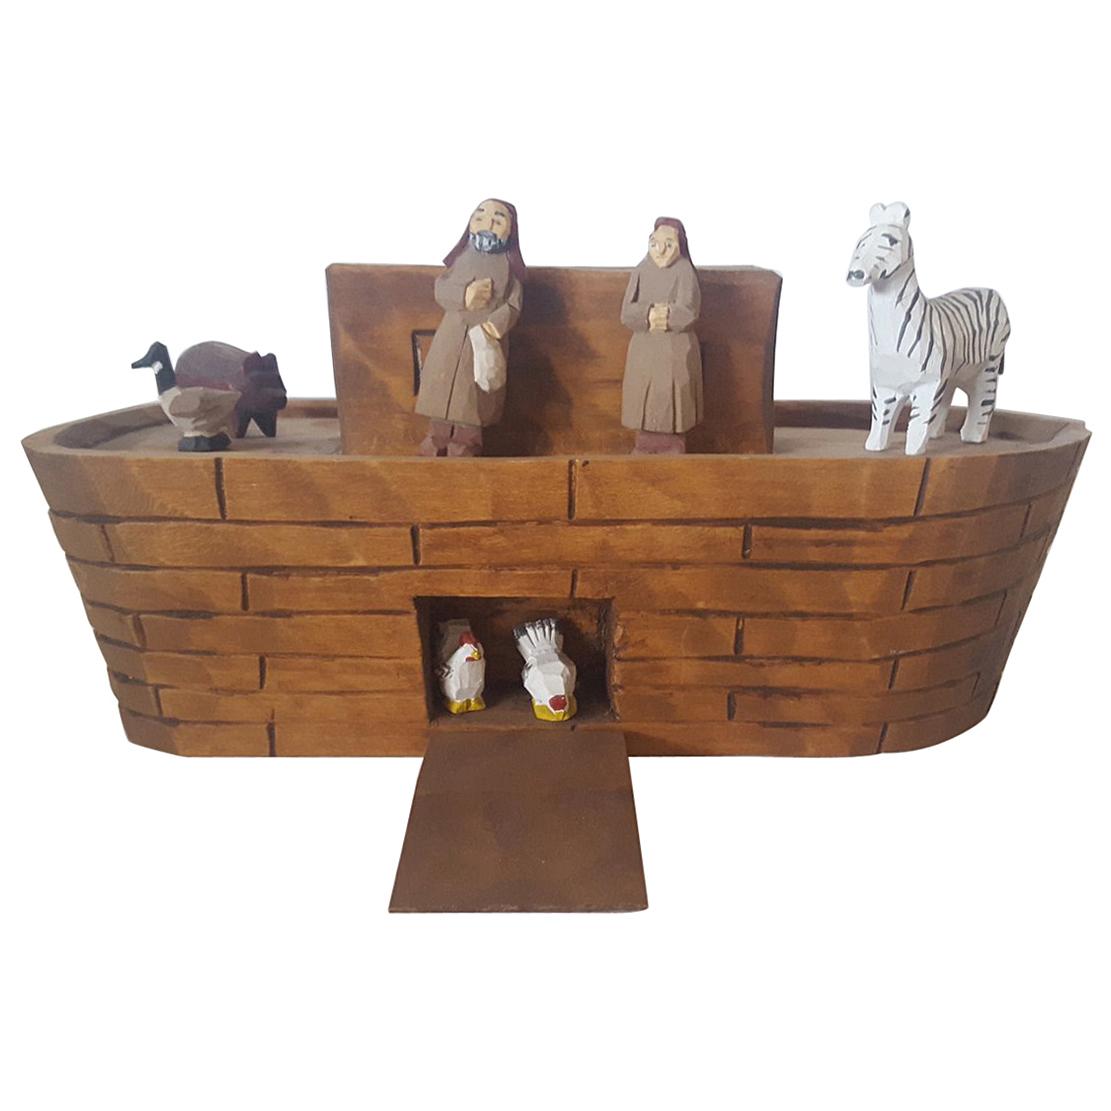 Wooden Model or Toy, of Noah's Ark, with Noah, His Wife Naamah, and Some Animals